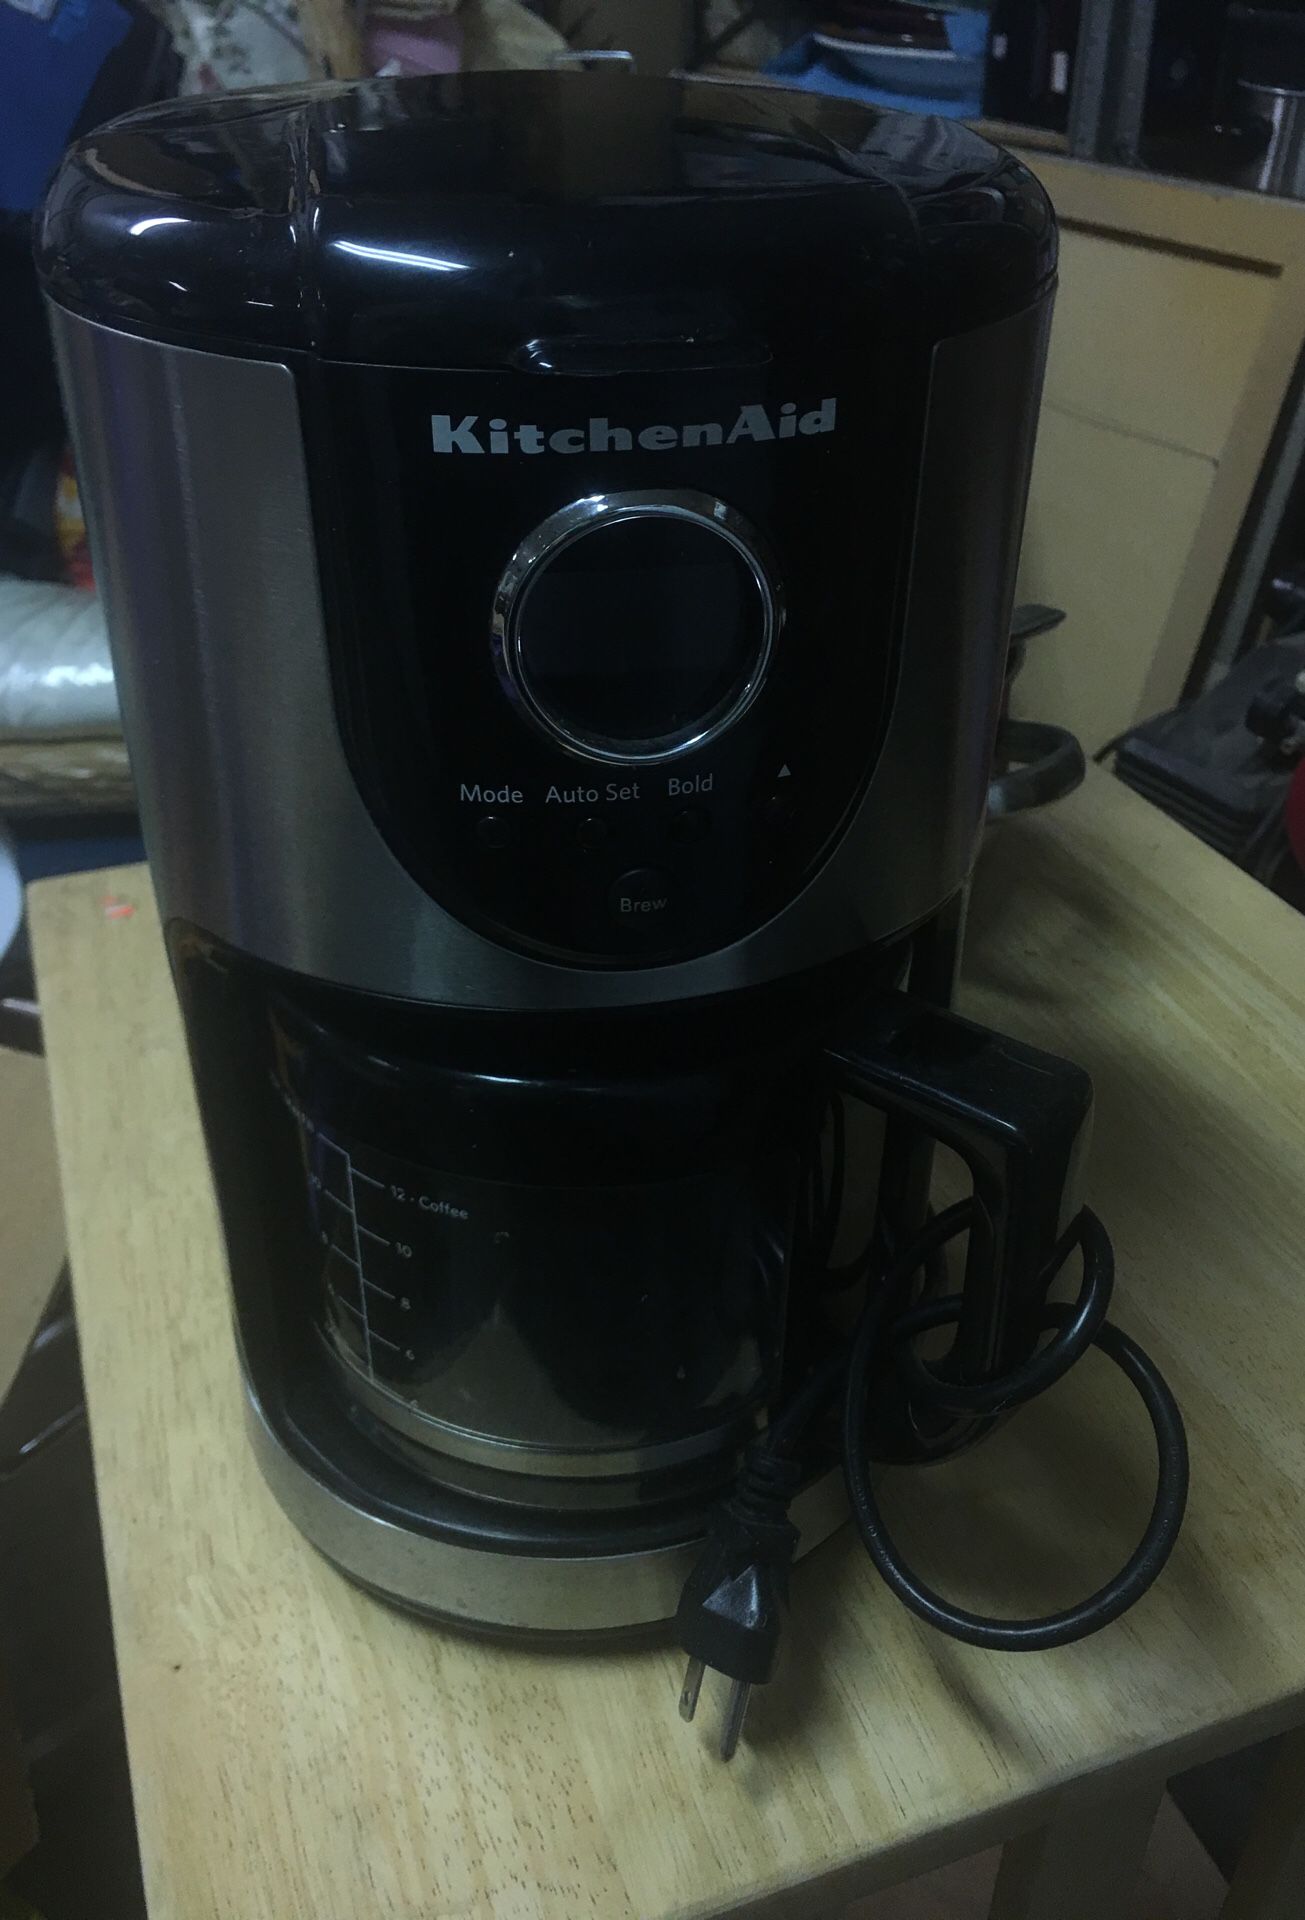 Cafetera Kitchenaid for Sale in Moreno Valley, CA - OfferUp